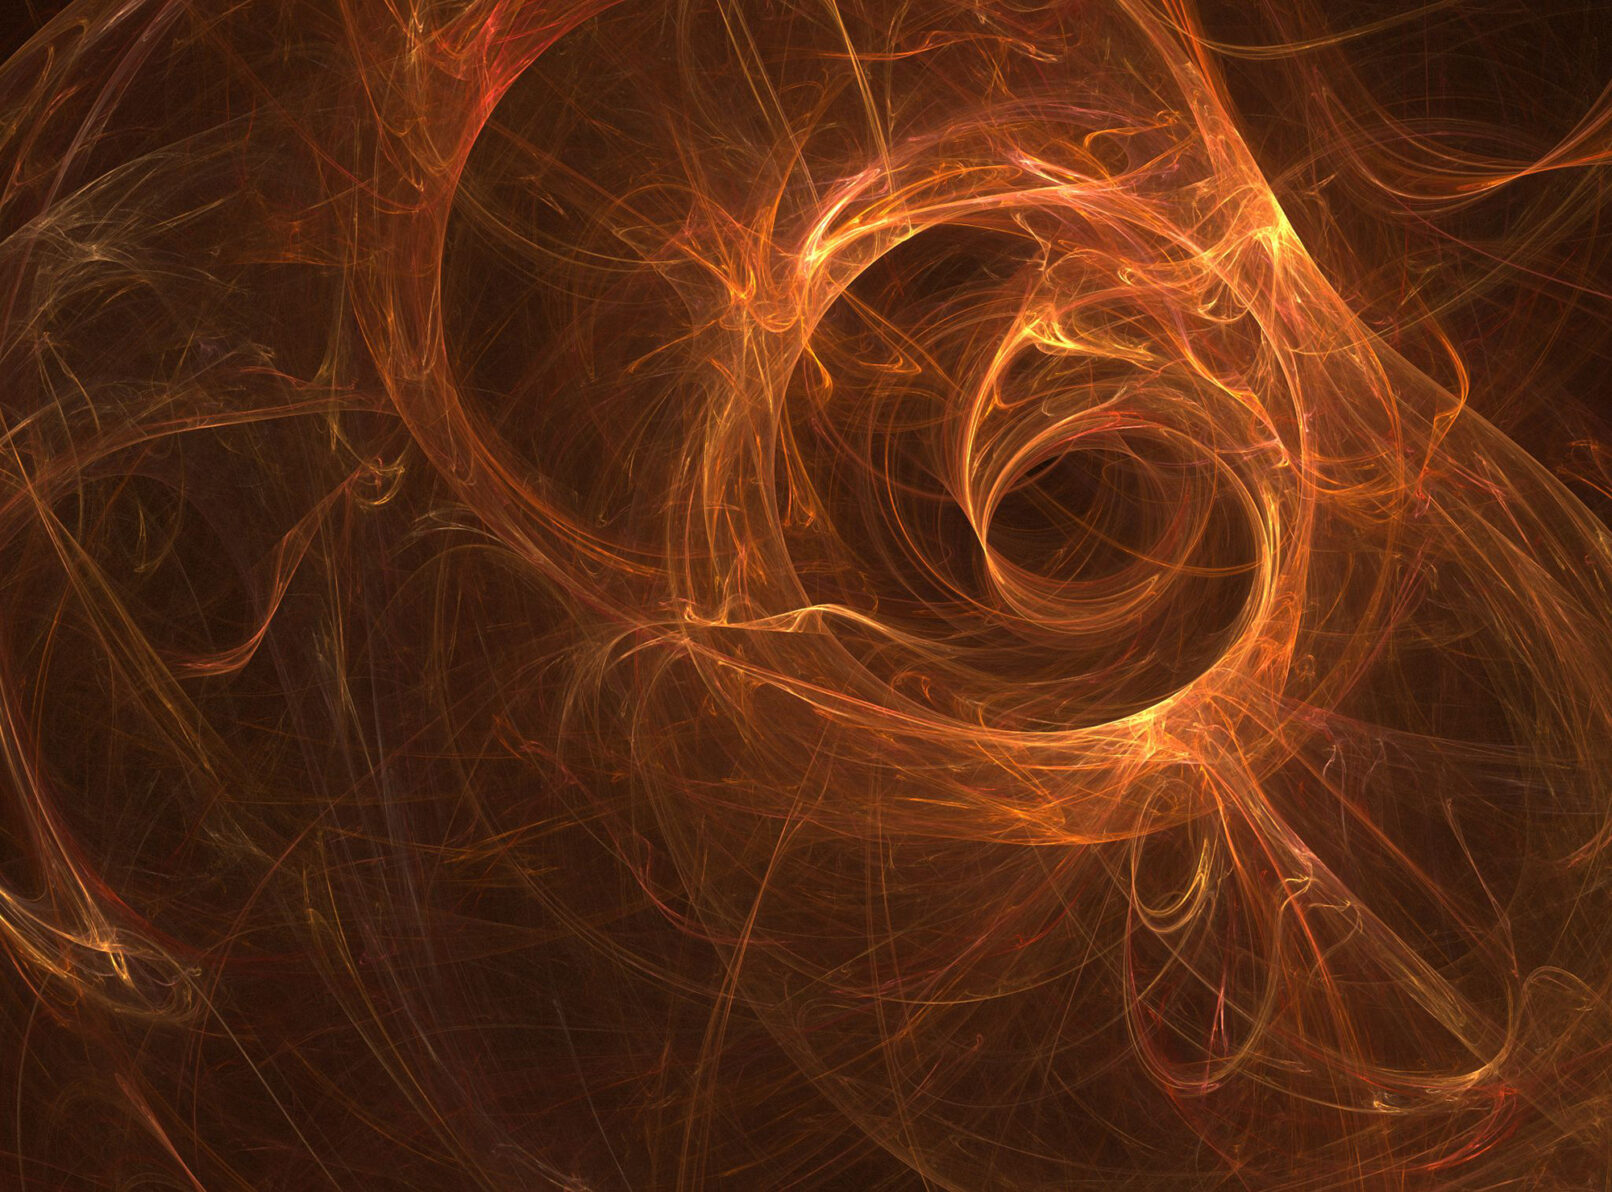 Fractal flame looking like a vortex of fire